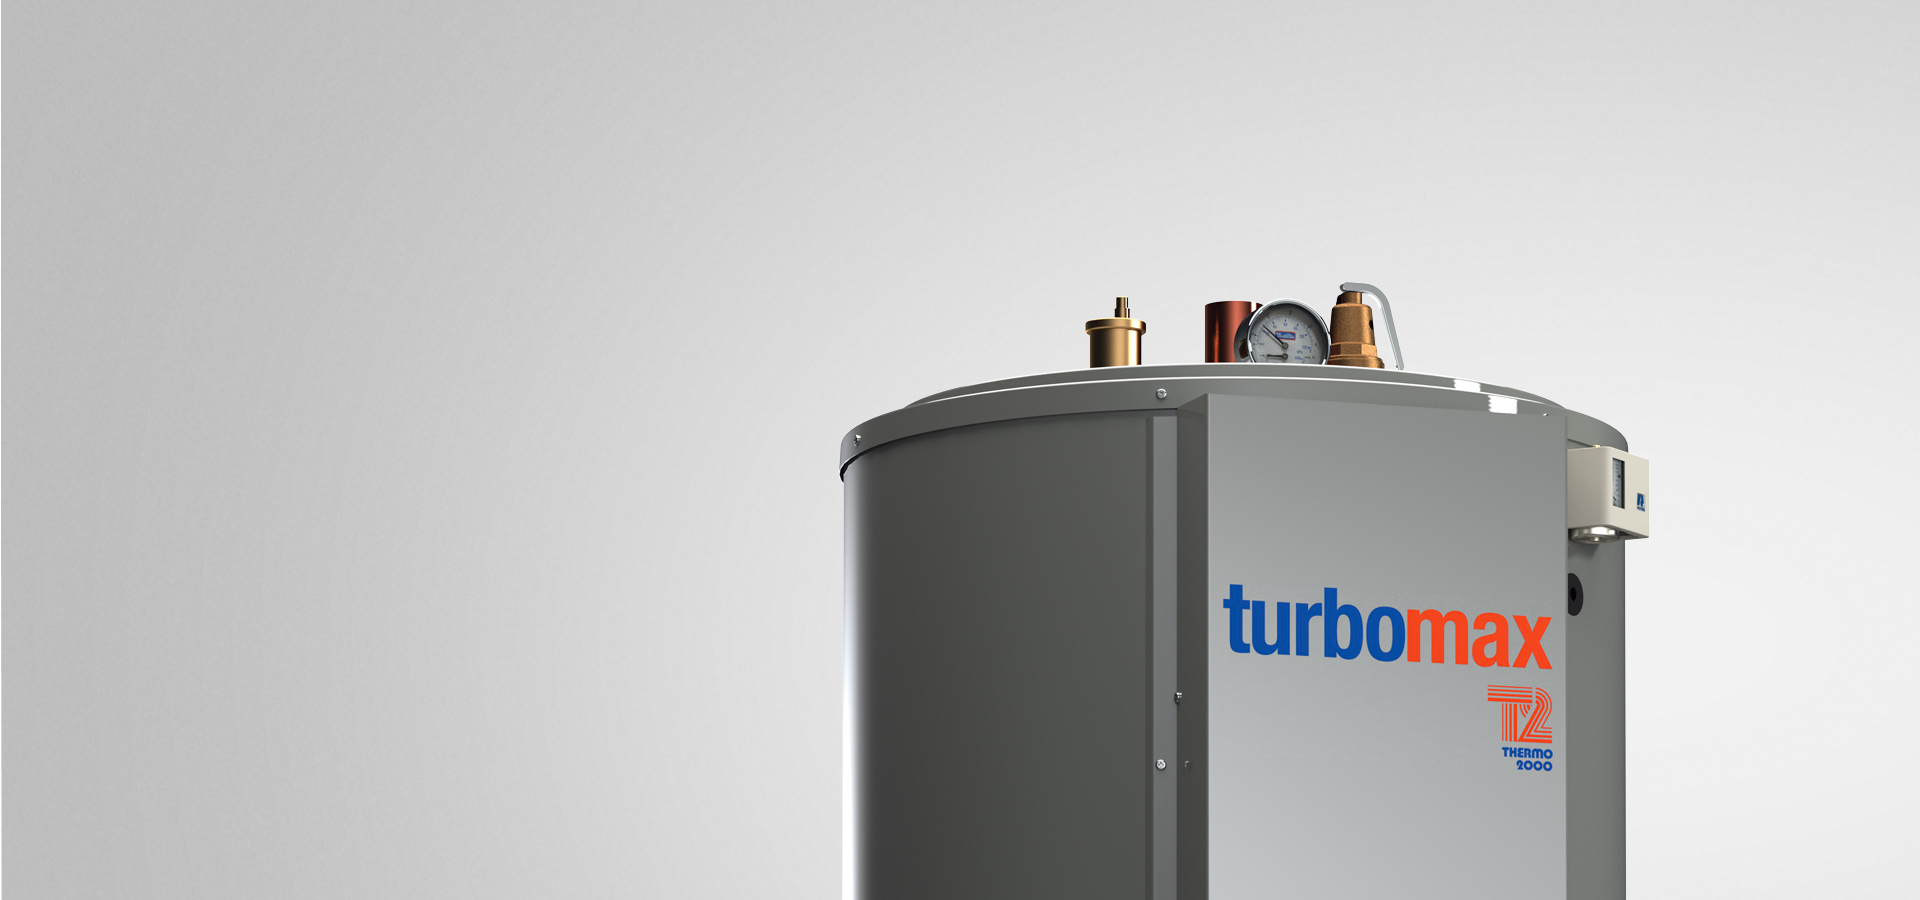 Beauty shot of the TurboMax instantaneous indirect water heater